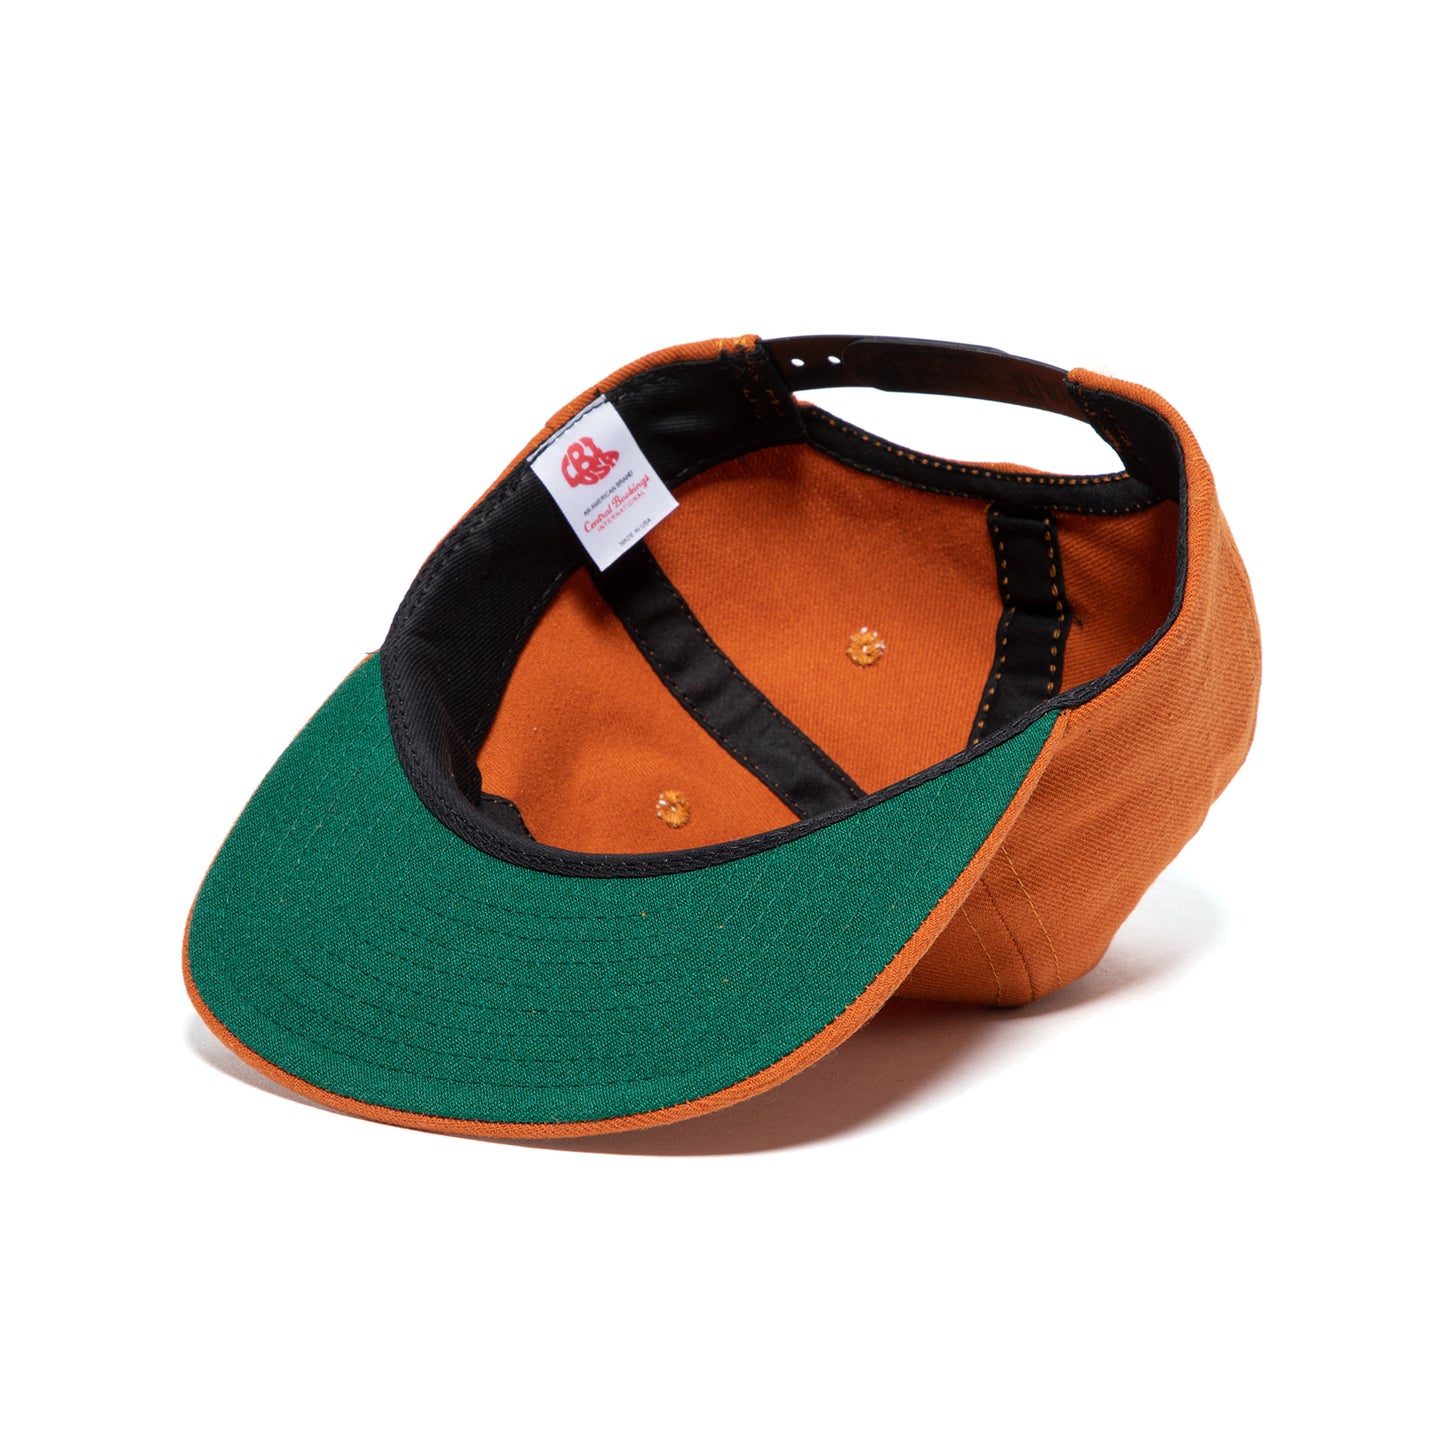 Central Bookings Courthouse Logo Hat (Orange)